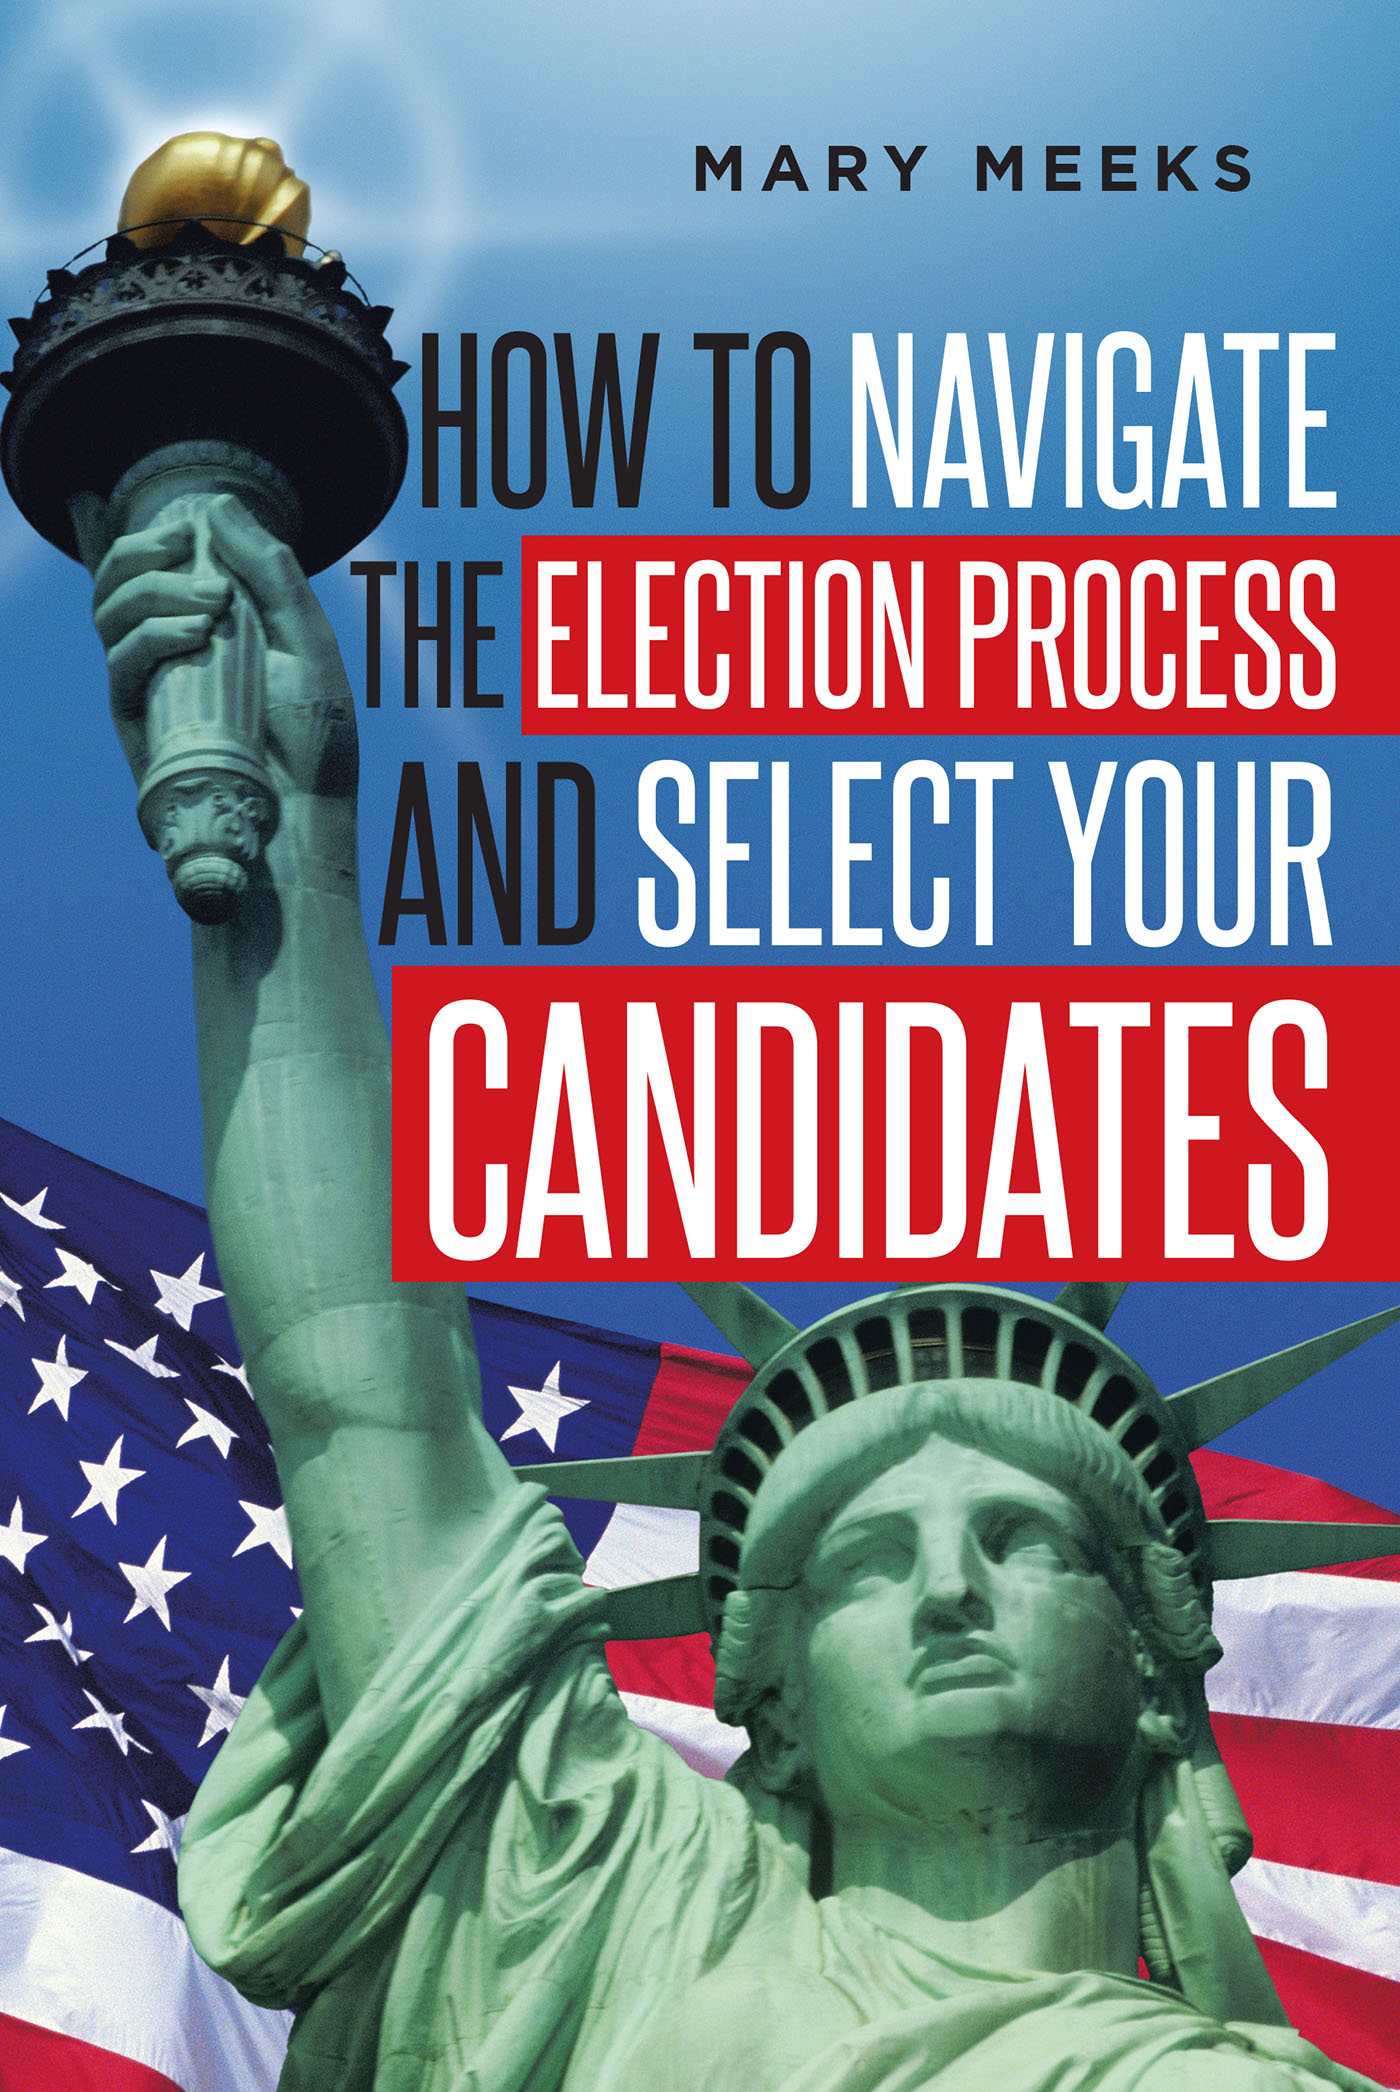 How to navigate the election process and select your candidates Cover Image